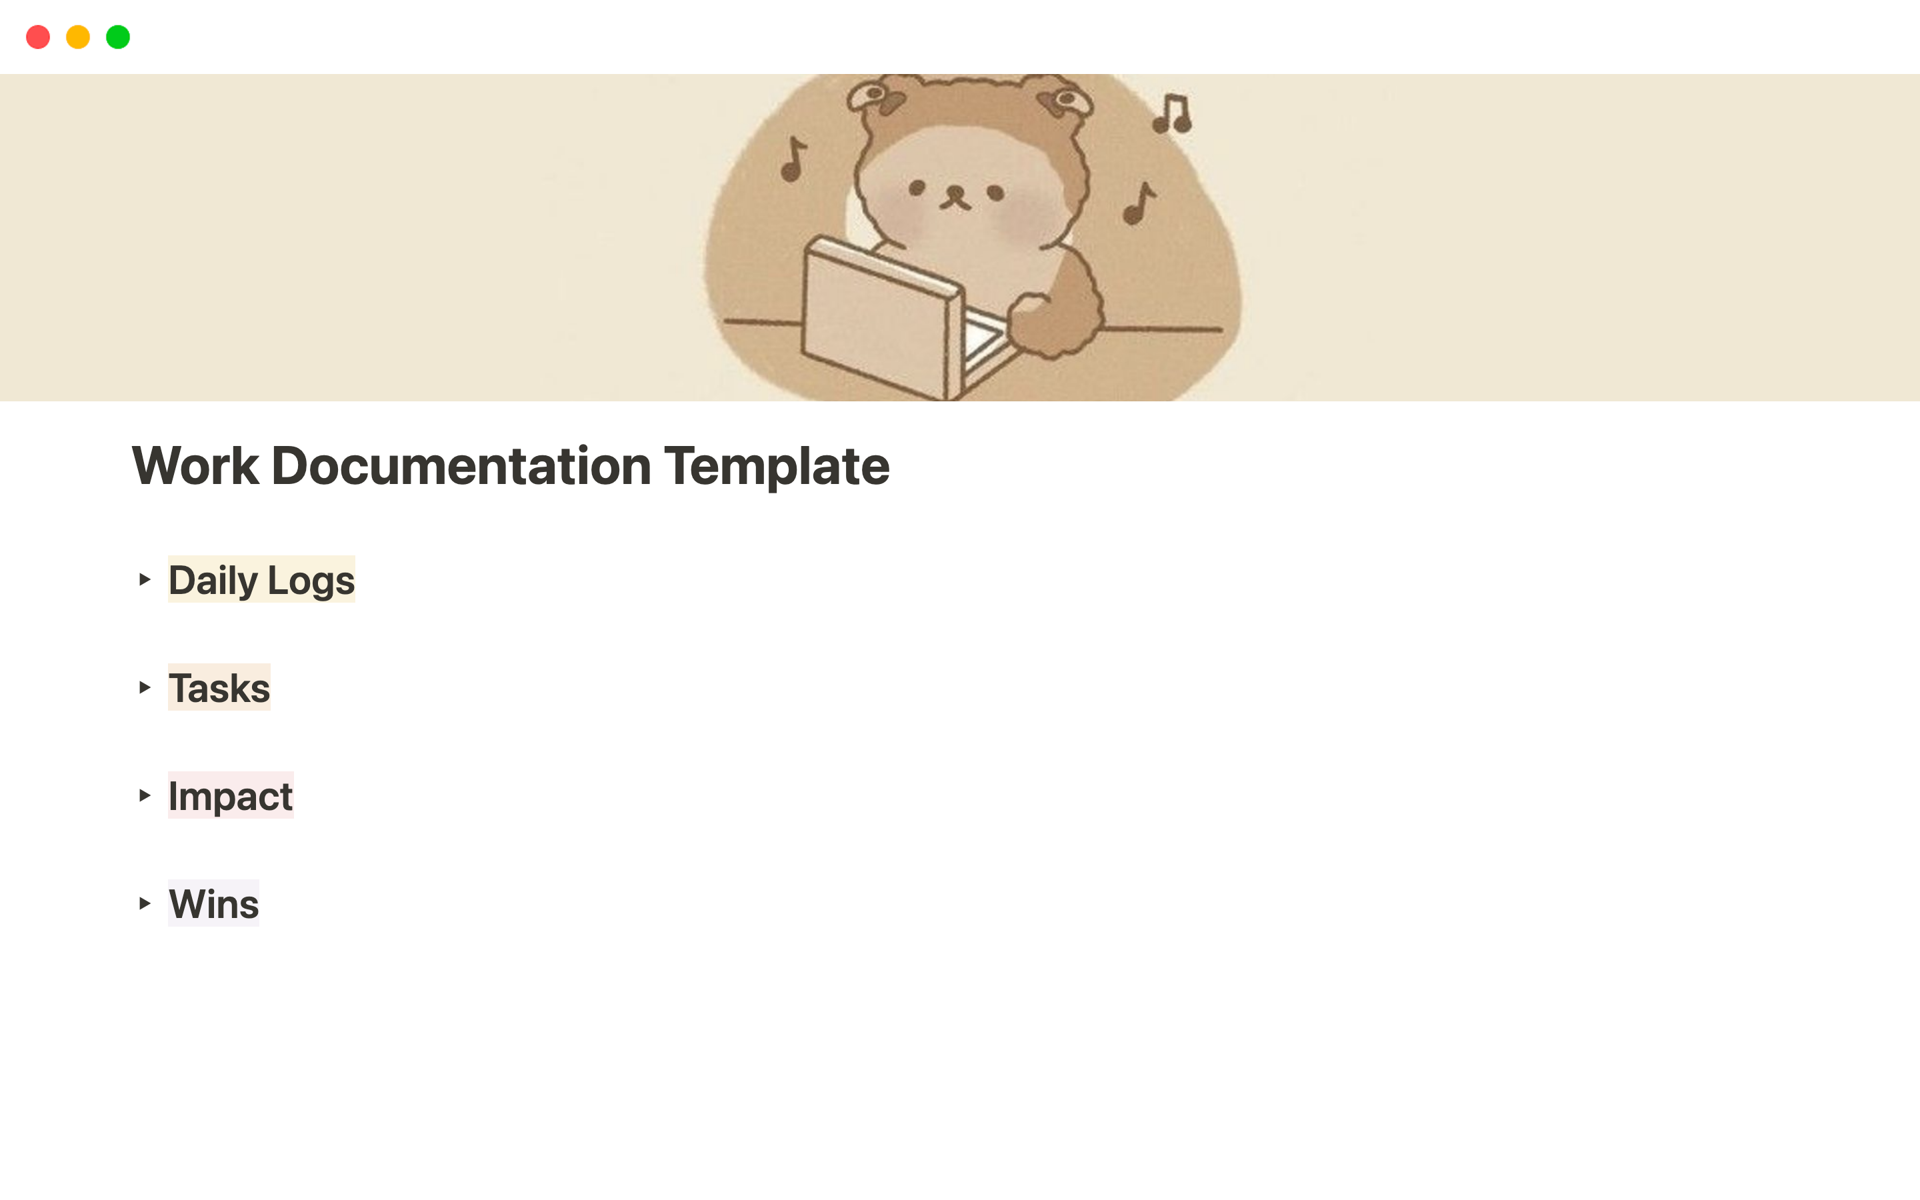 A template preview for Work Documentation